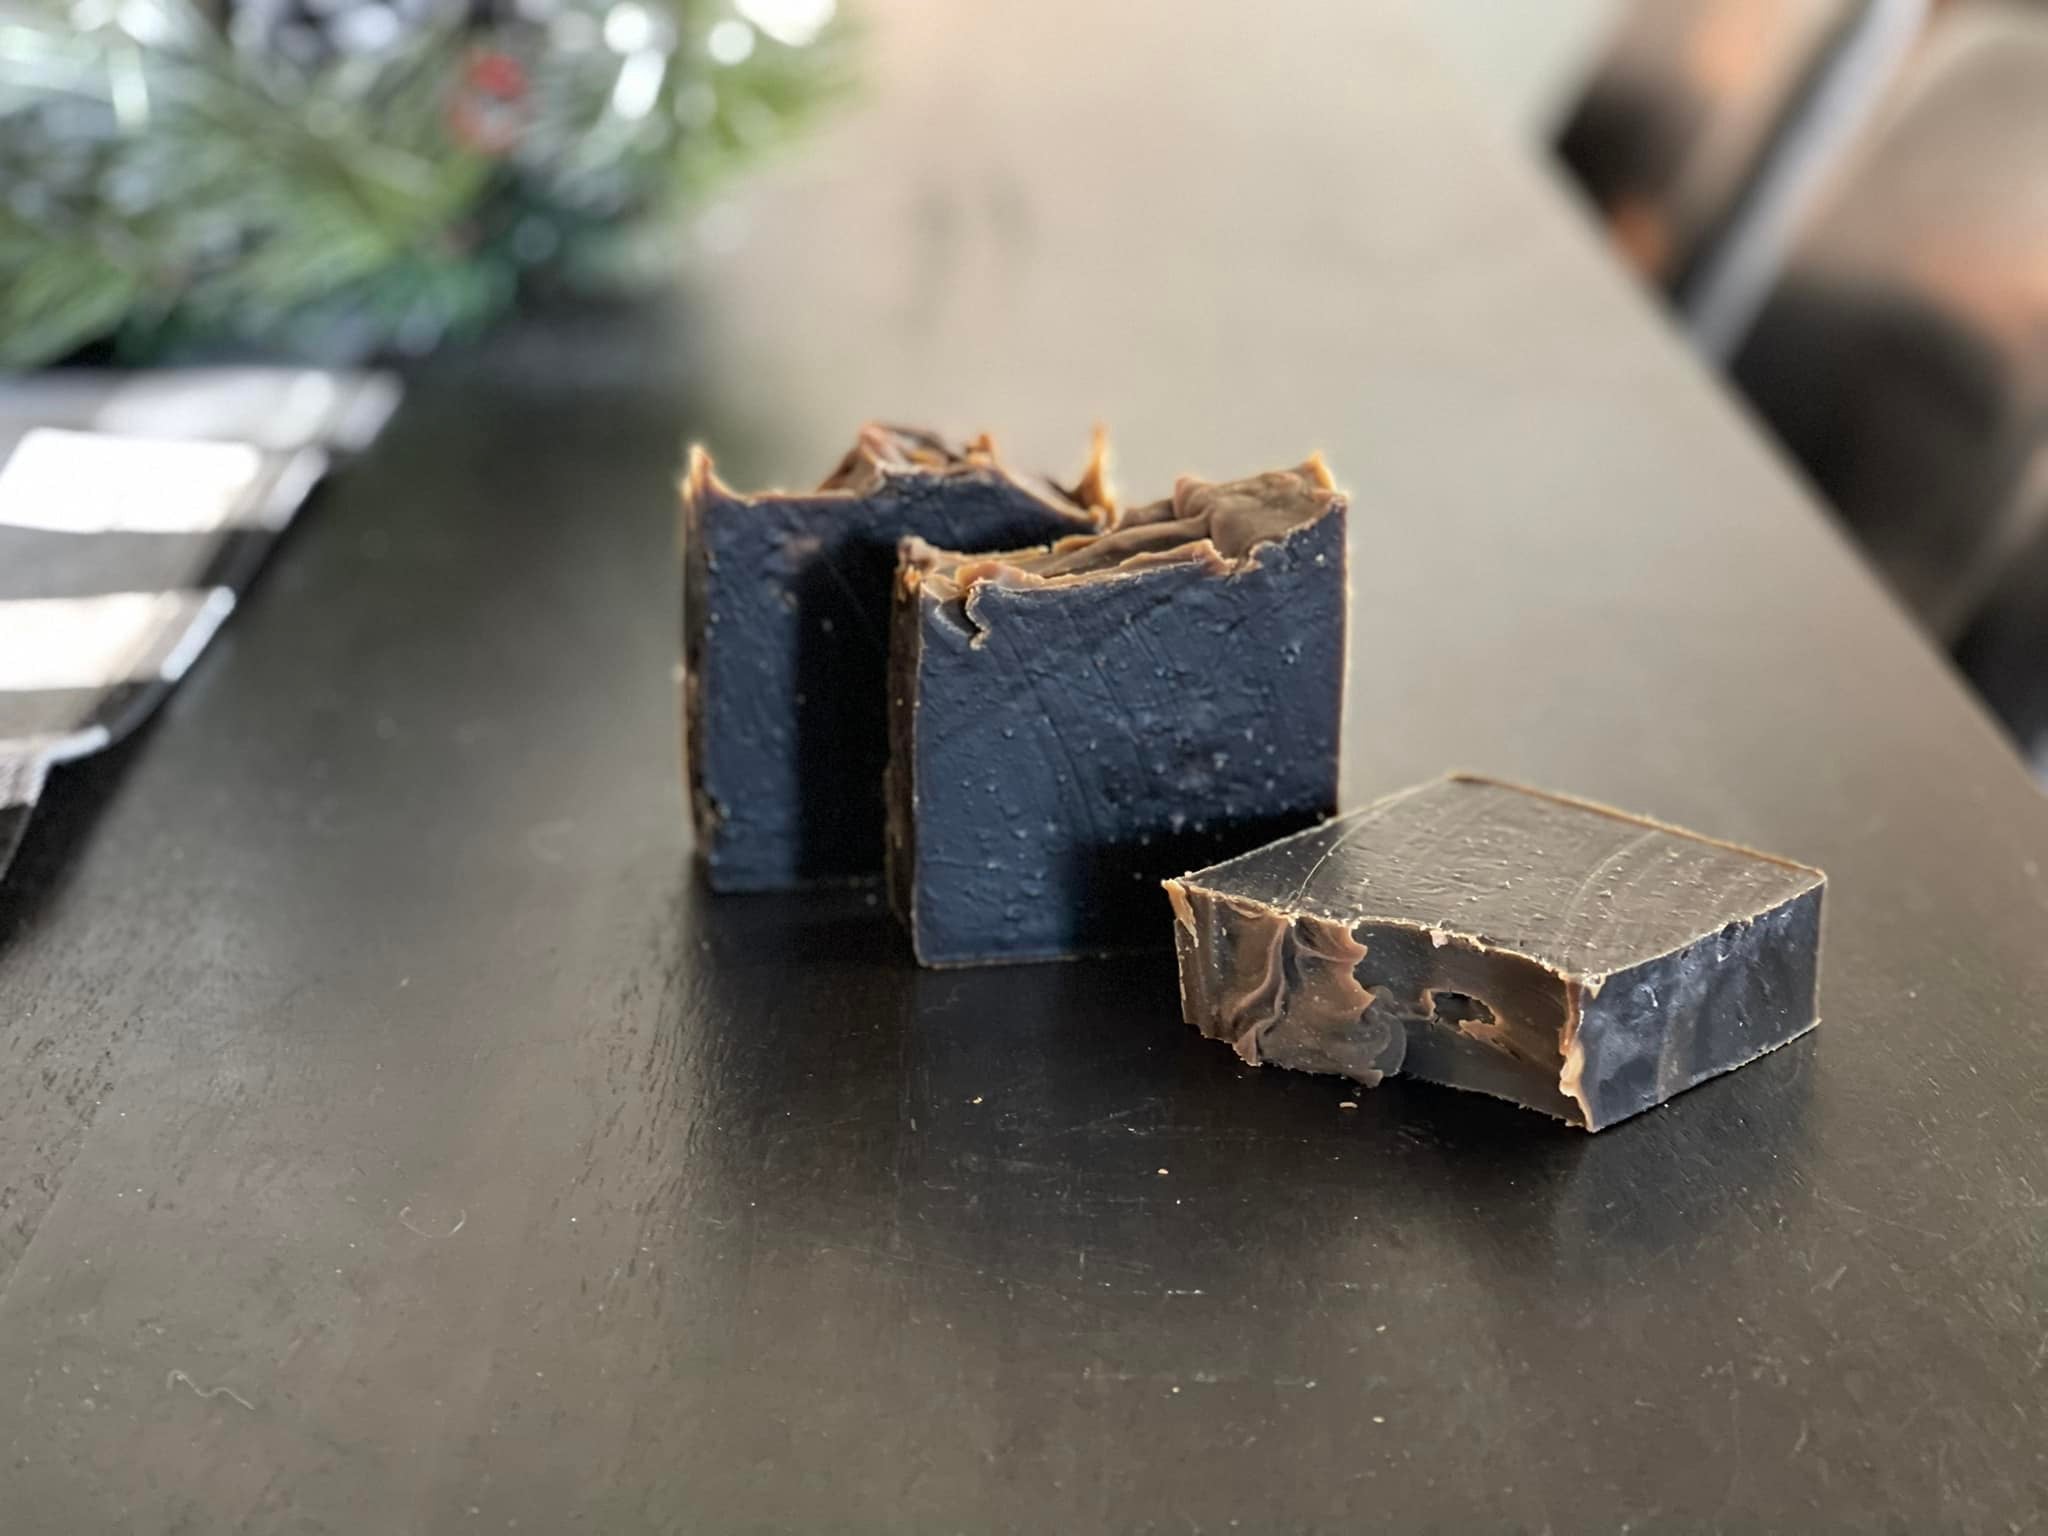 Pine Tar Soap · Tennessee Homemade Soap · Online Store Powered by